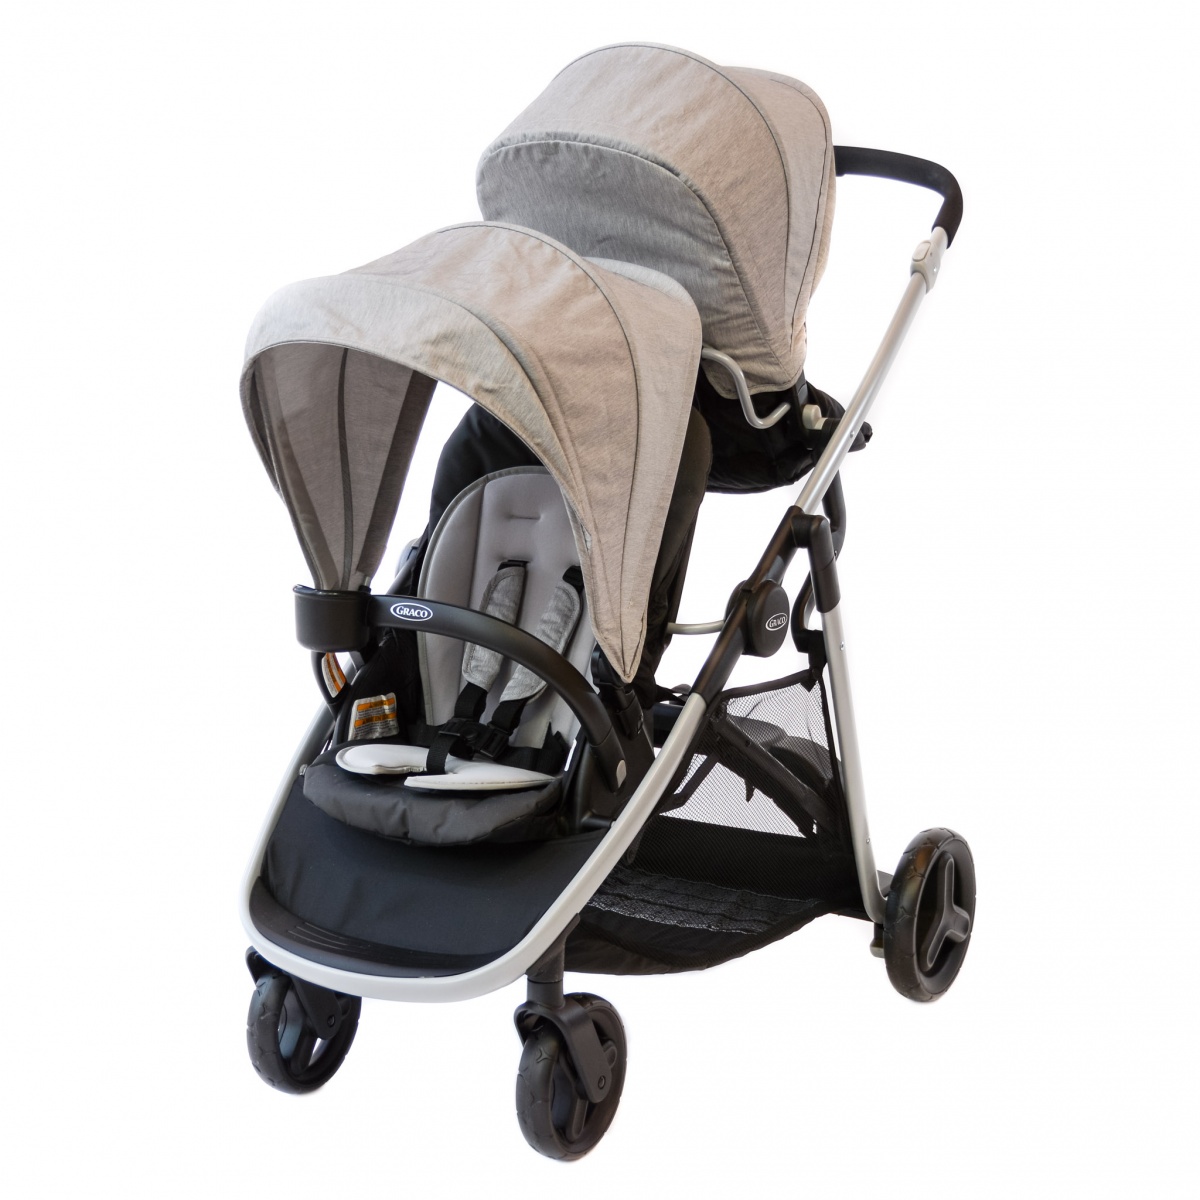 Graco Ready2Grow LX 2.0 Review